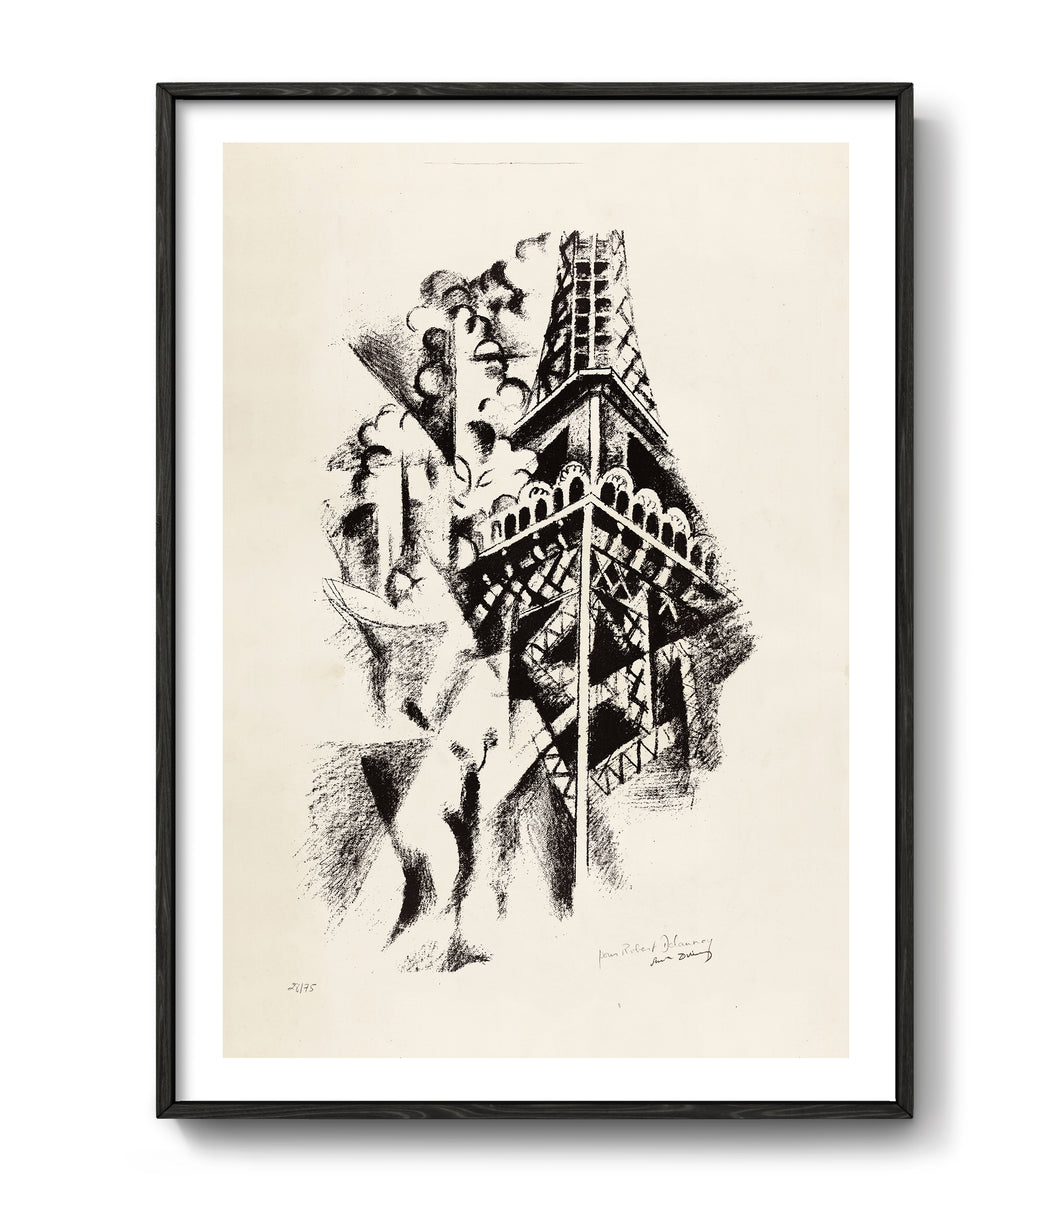 Tower by Robert Delaunay